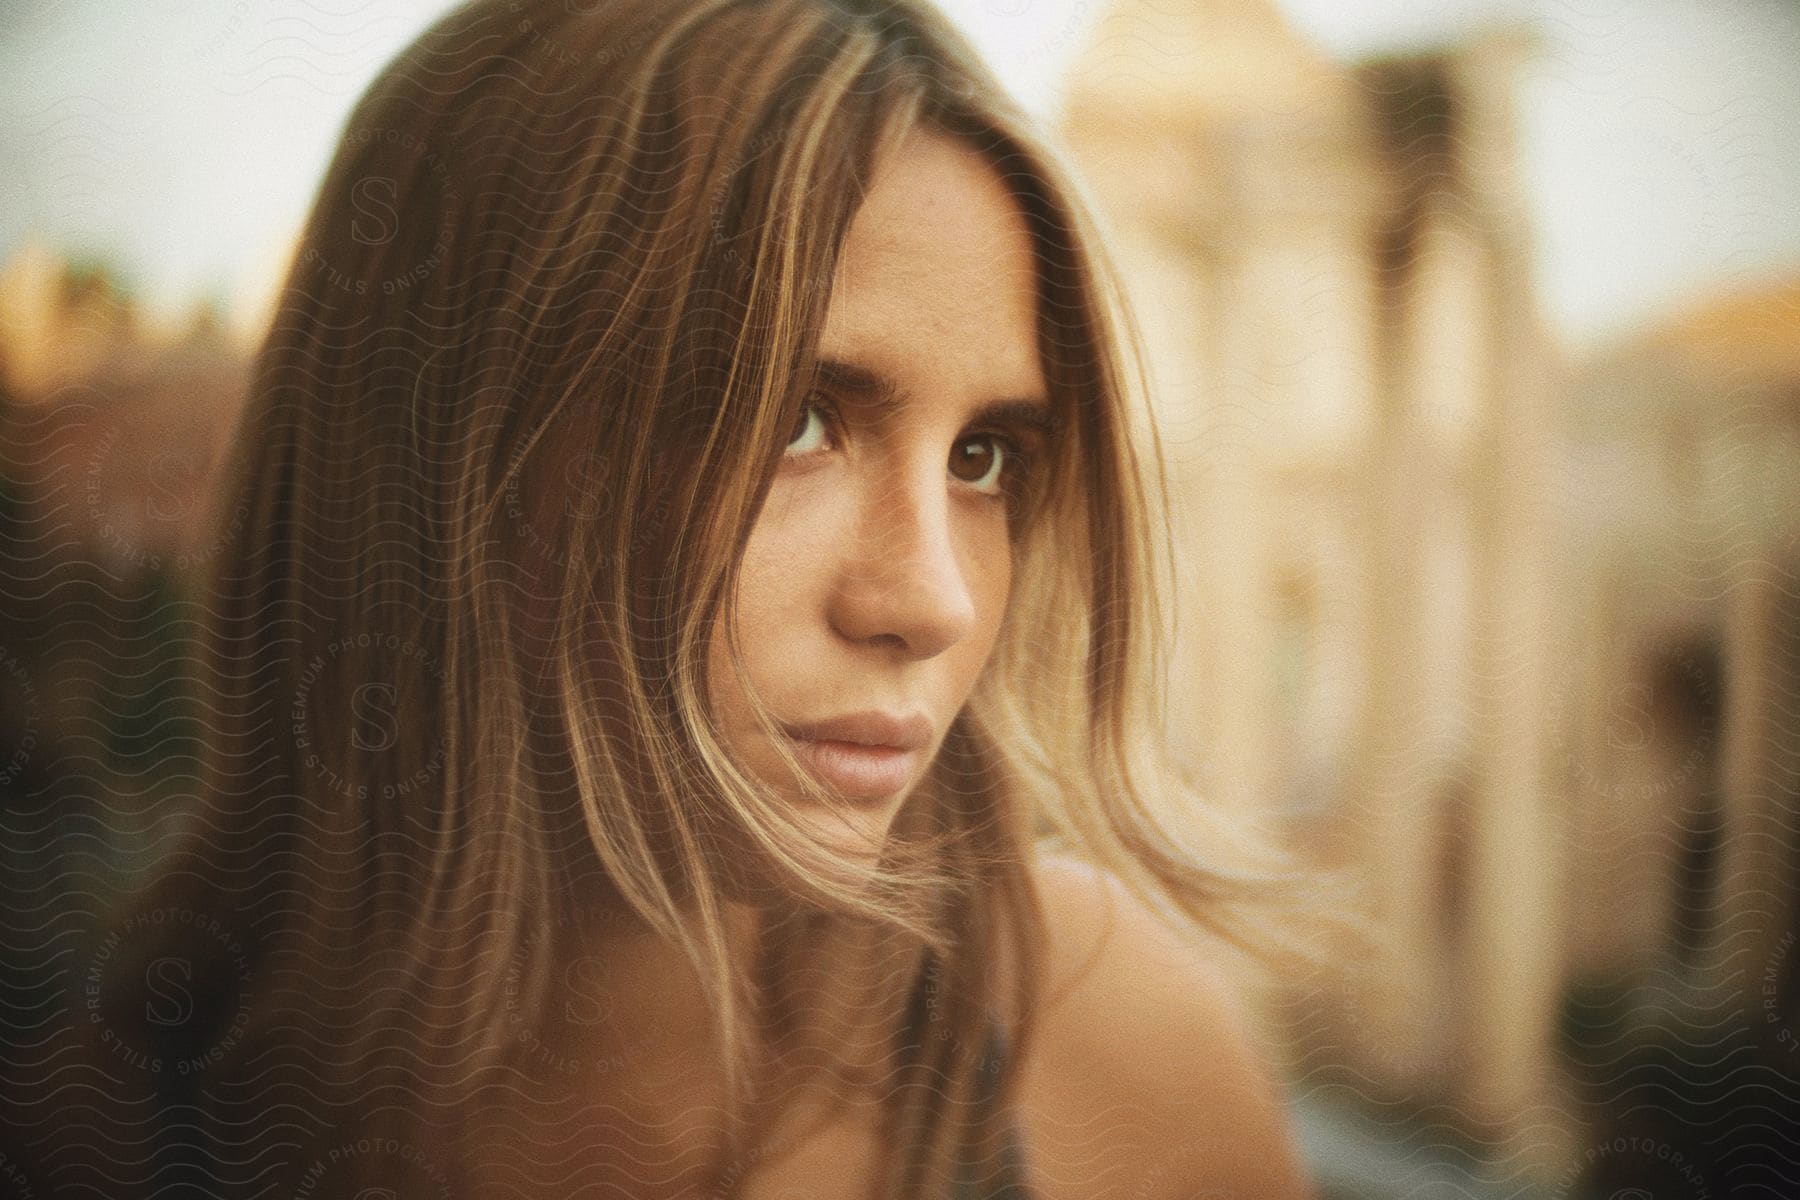 A women with brown eyes and brown hair is looking off into the distance.